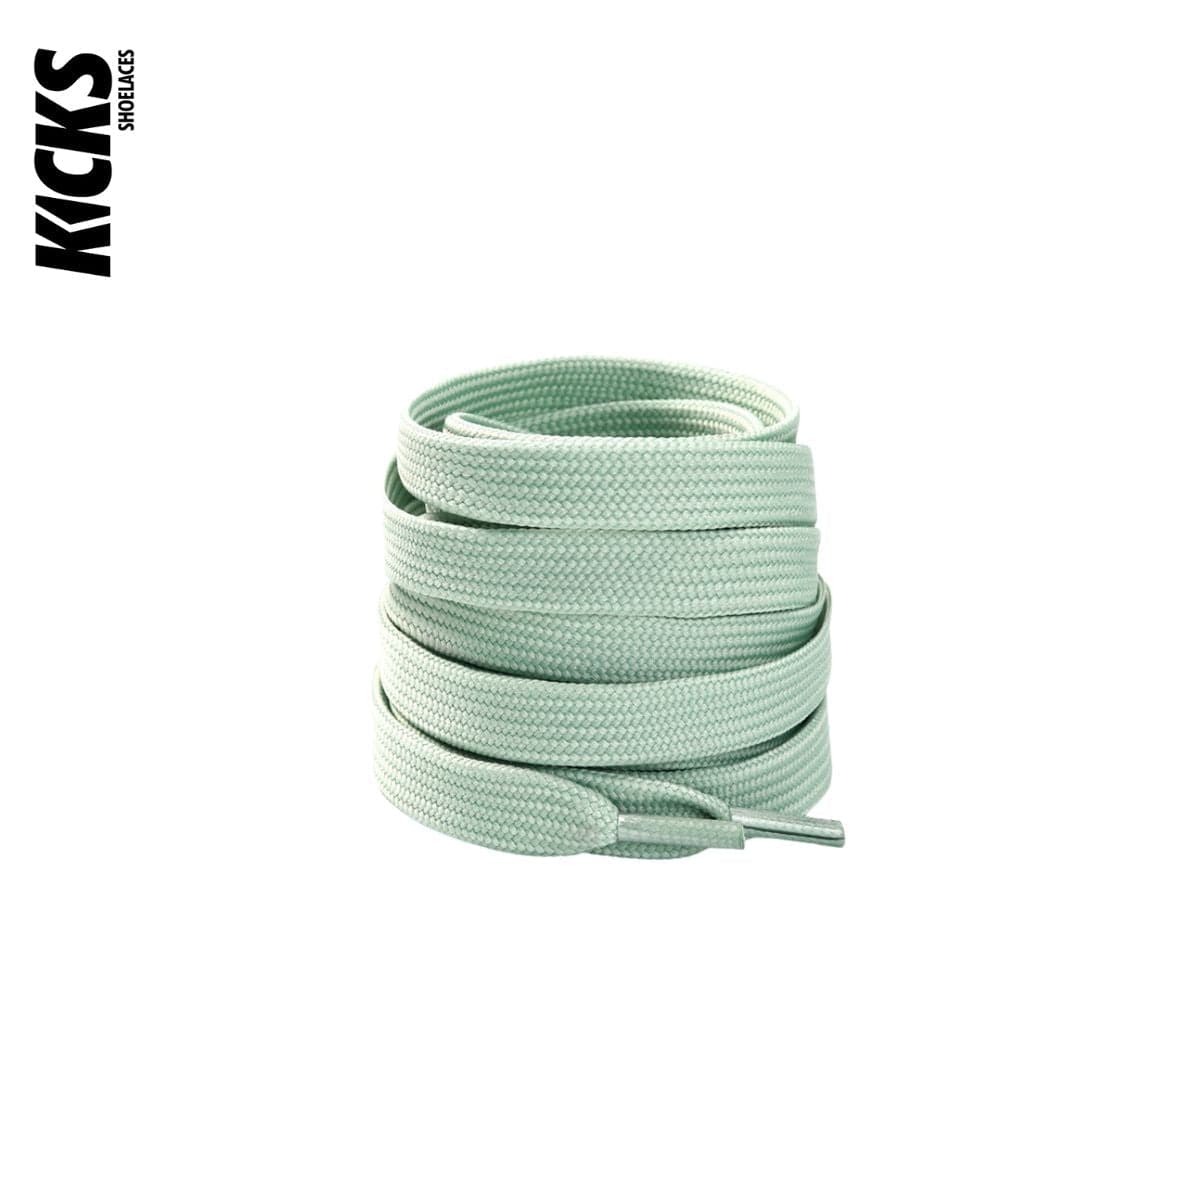 Pastel Green Replacement Shoe Laces for Adidas NMD Sneakers by Kicks Shoelaces